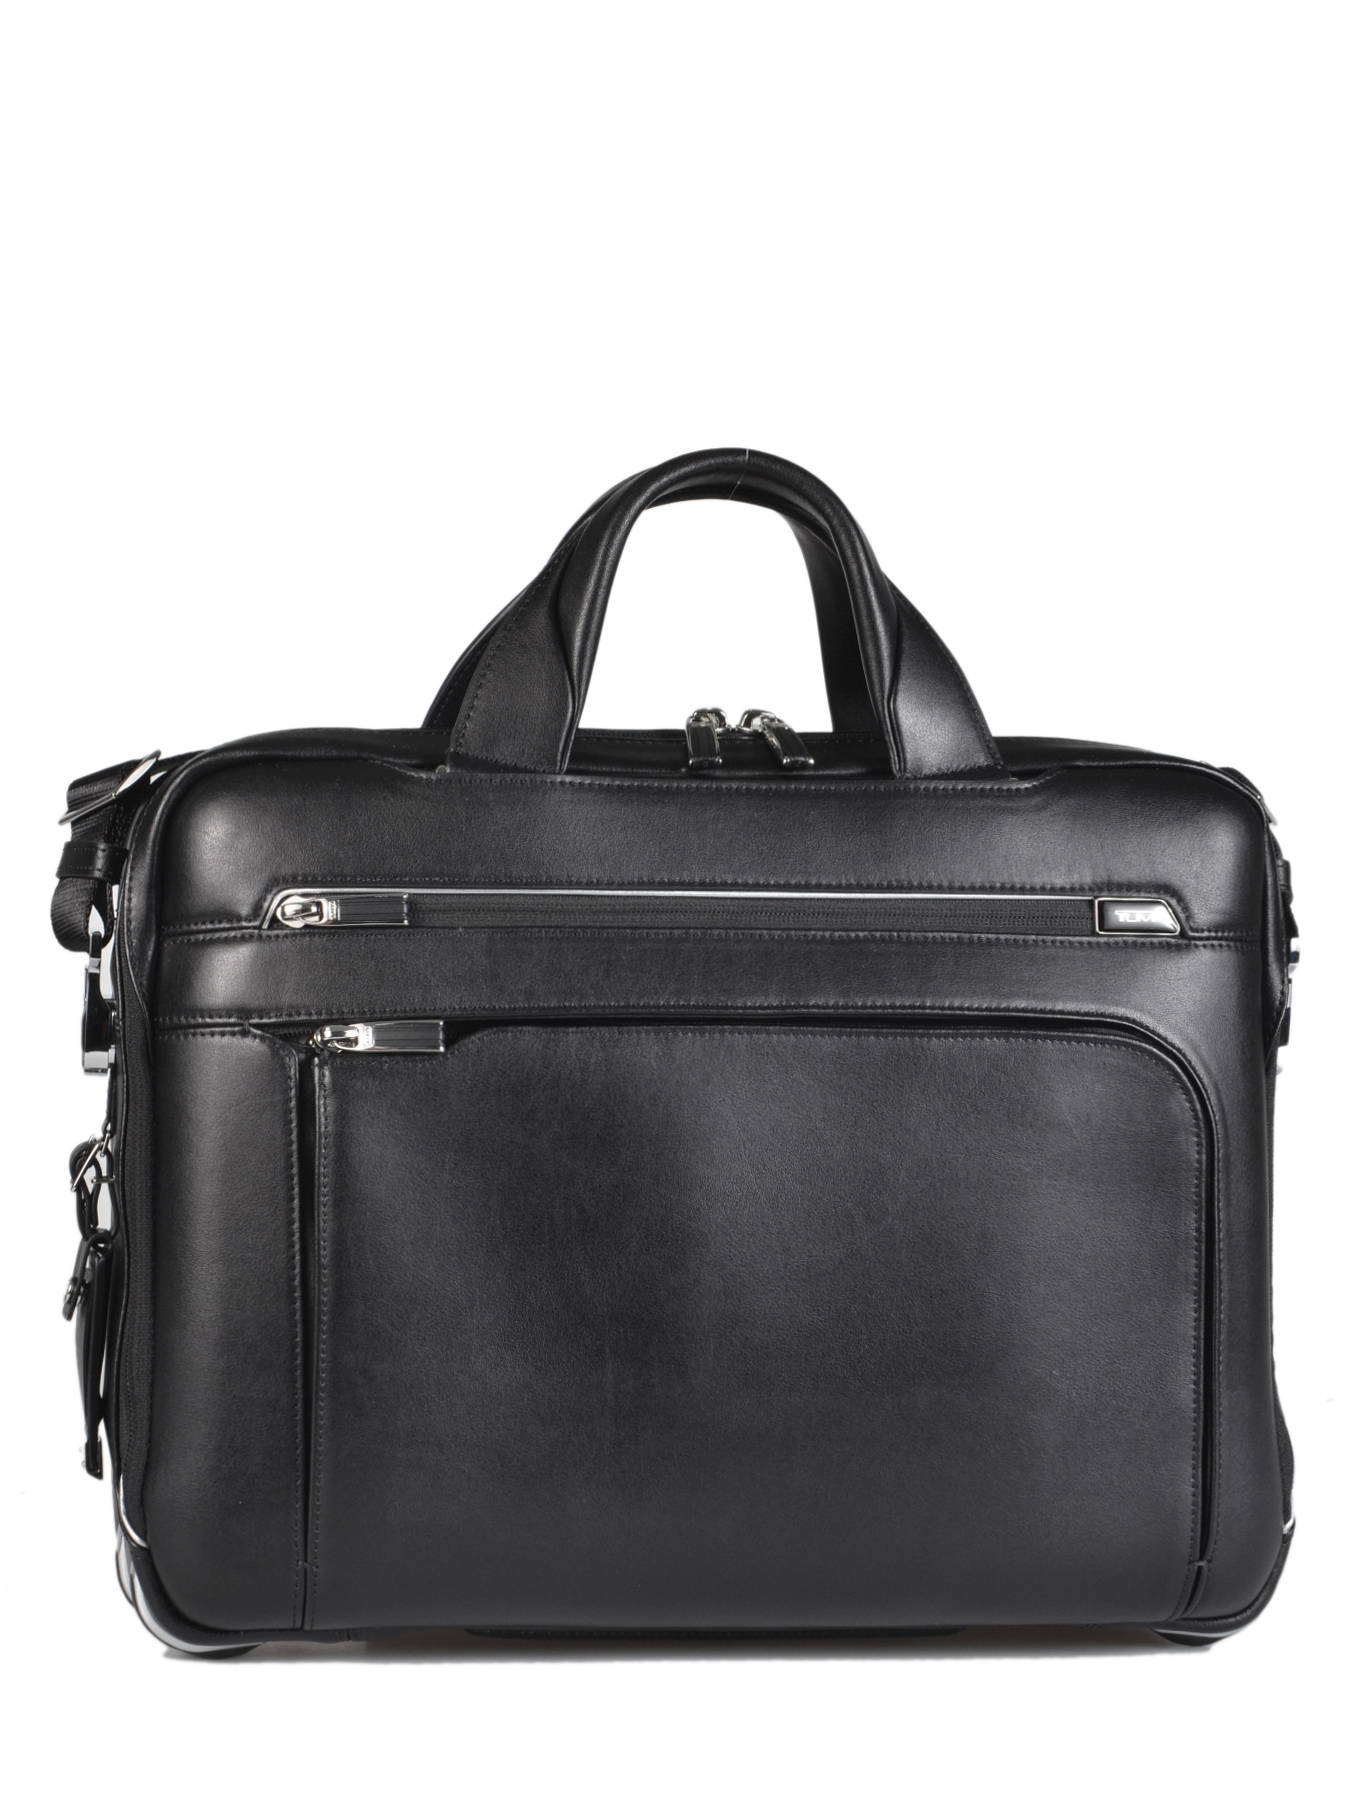 Tumi Briefcase Arrive leather - Best prices